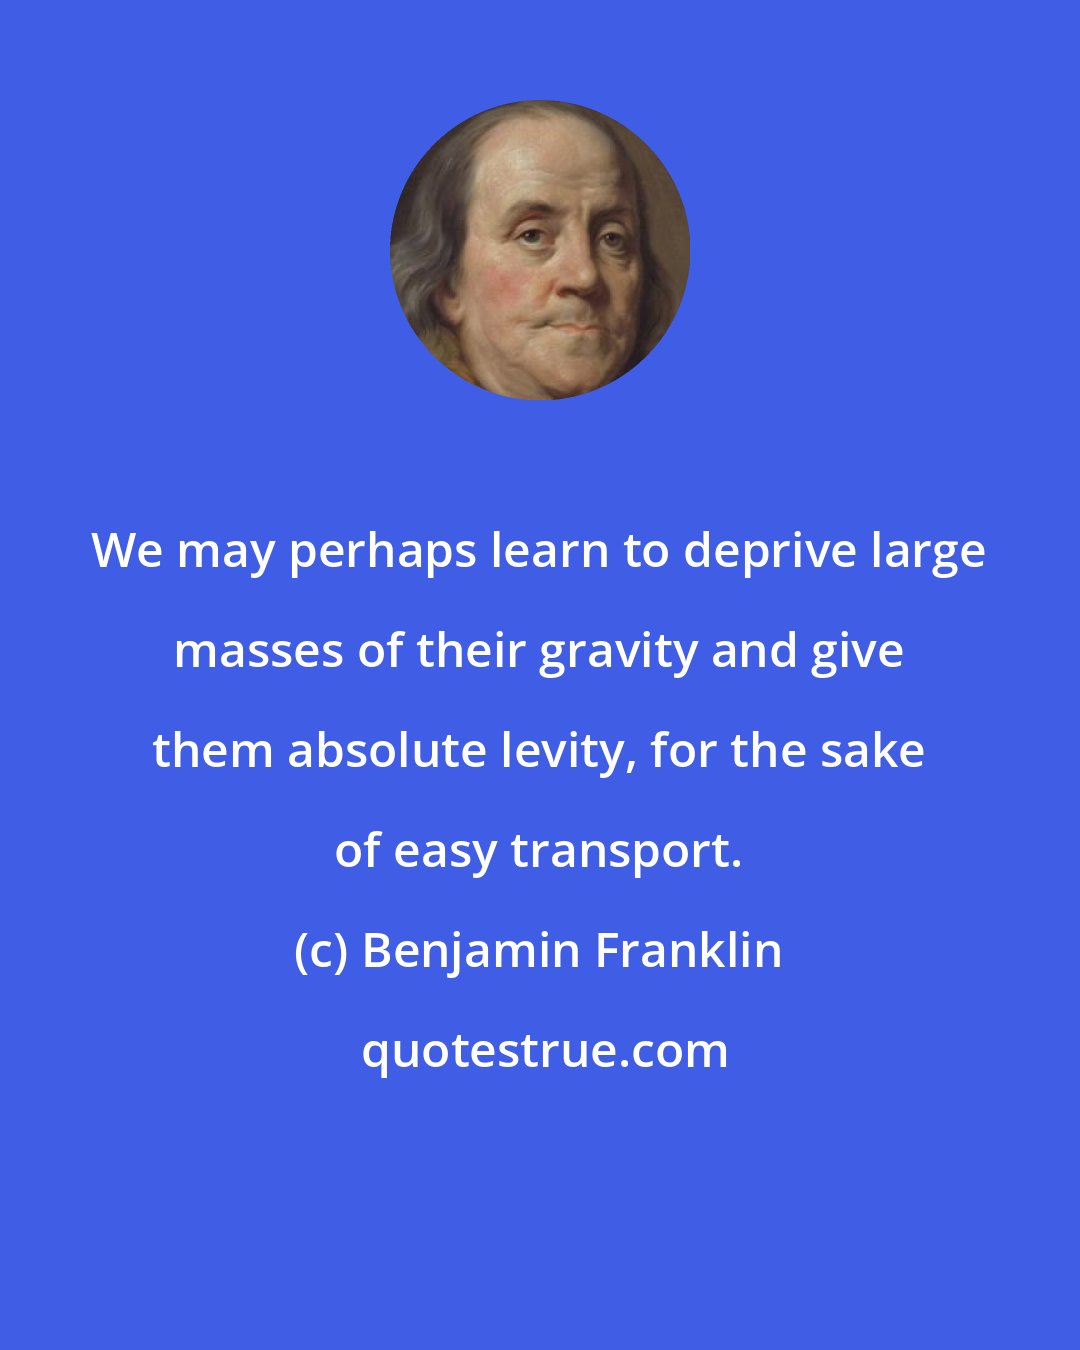 Benjamin Franklin: We may perhaps learn to deprive large masses of their gravity and give them absolute levity, for the sake of easy transport.